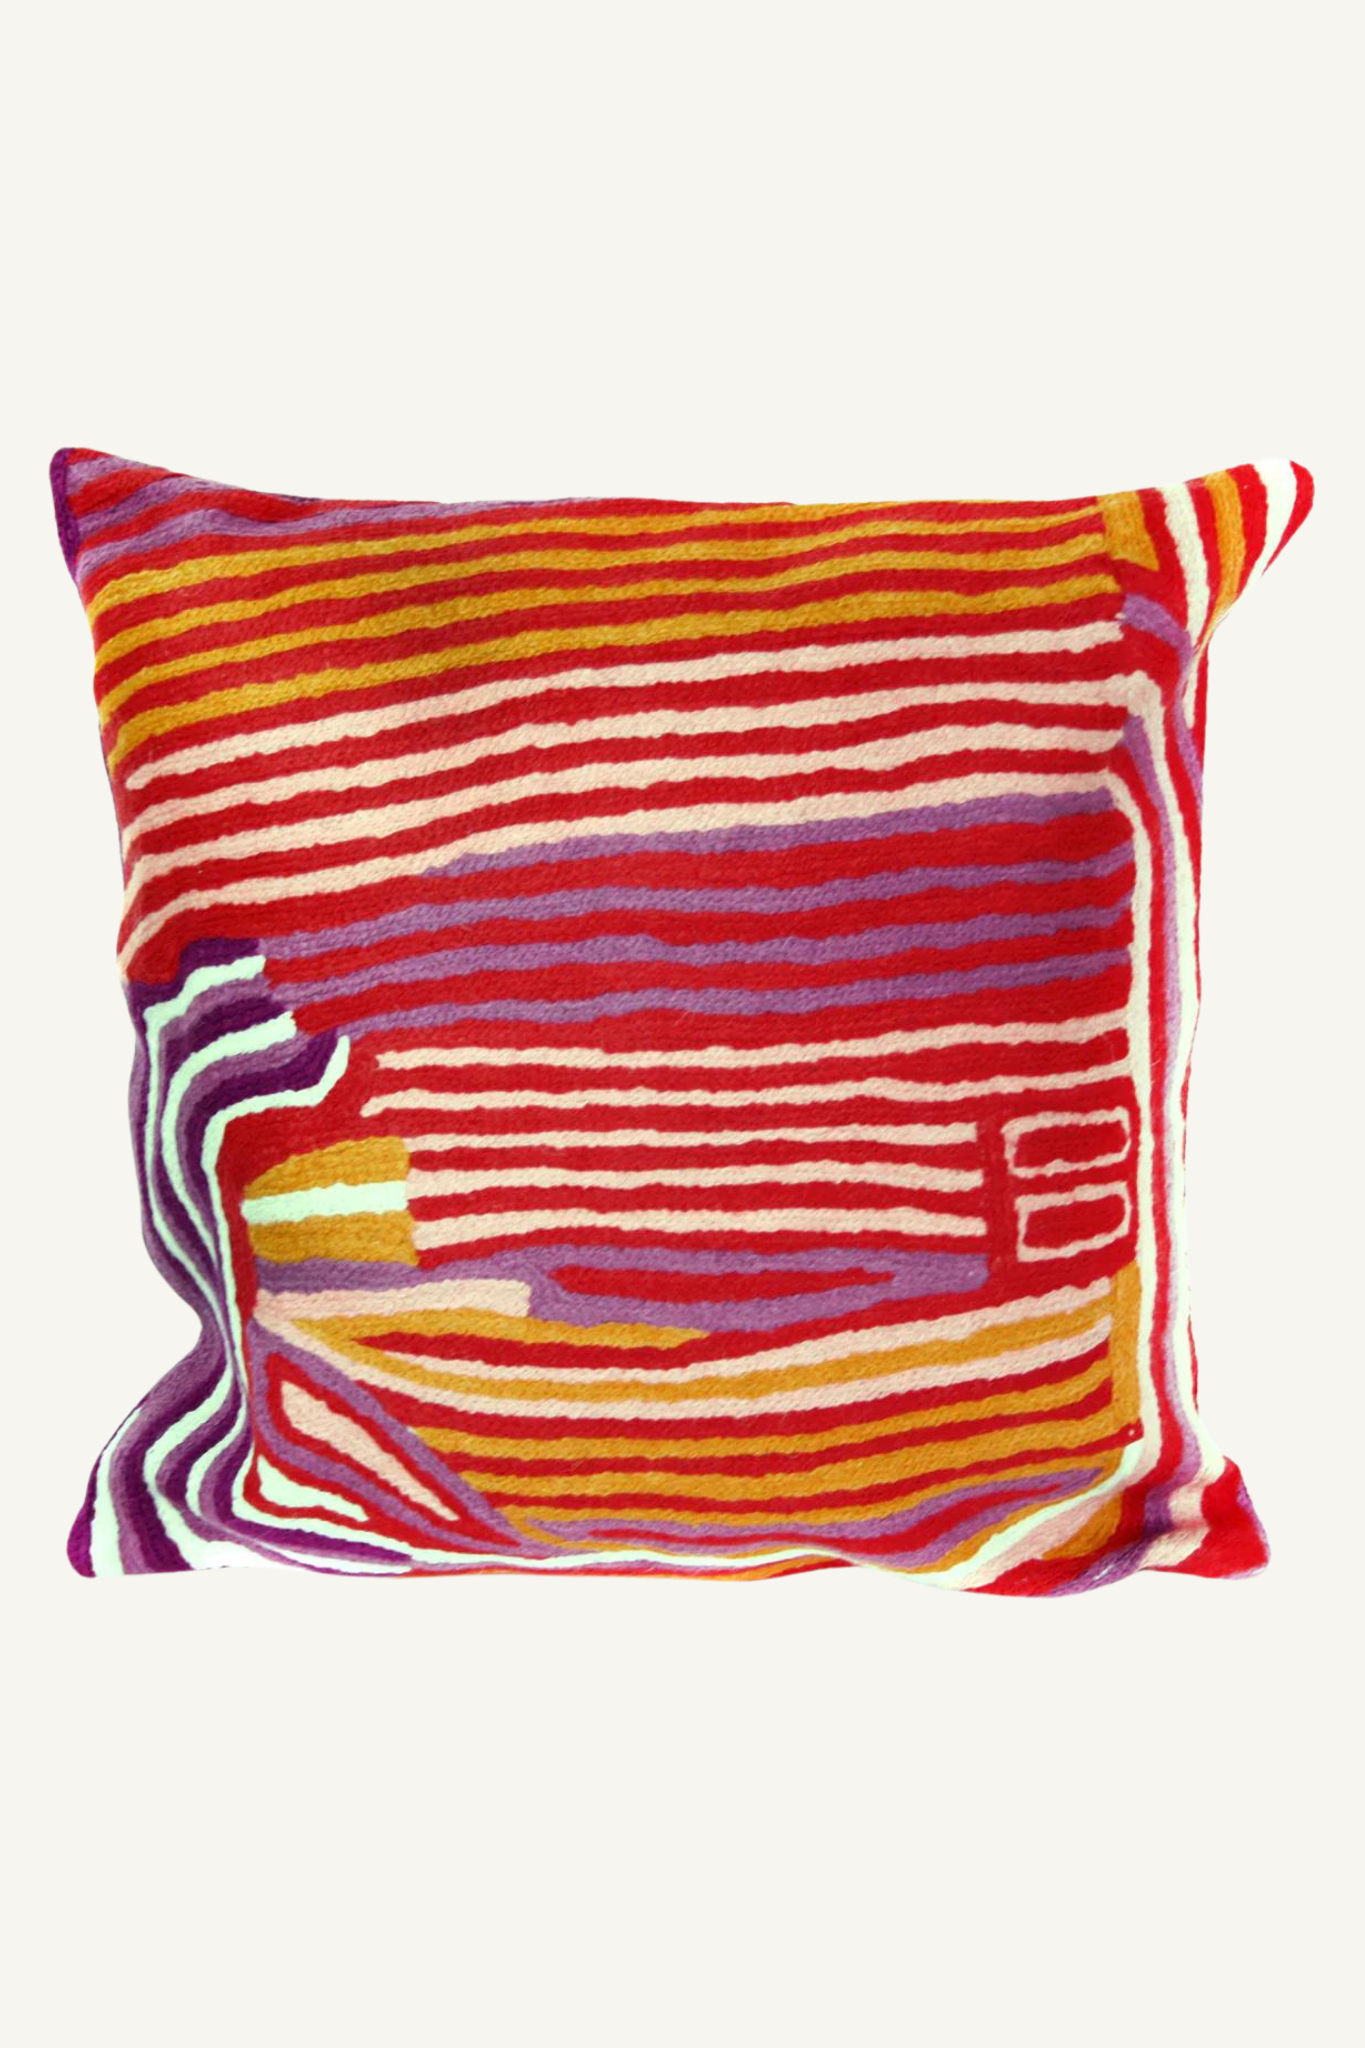 Cushion Cover - Mary Anne Nampinjinpa Michaels (LARGE)